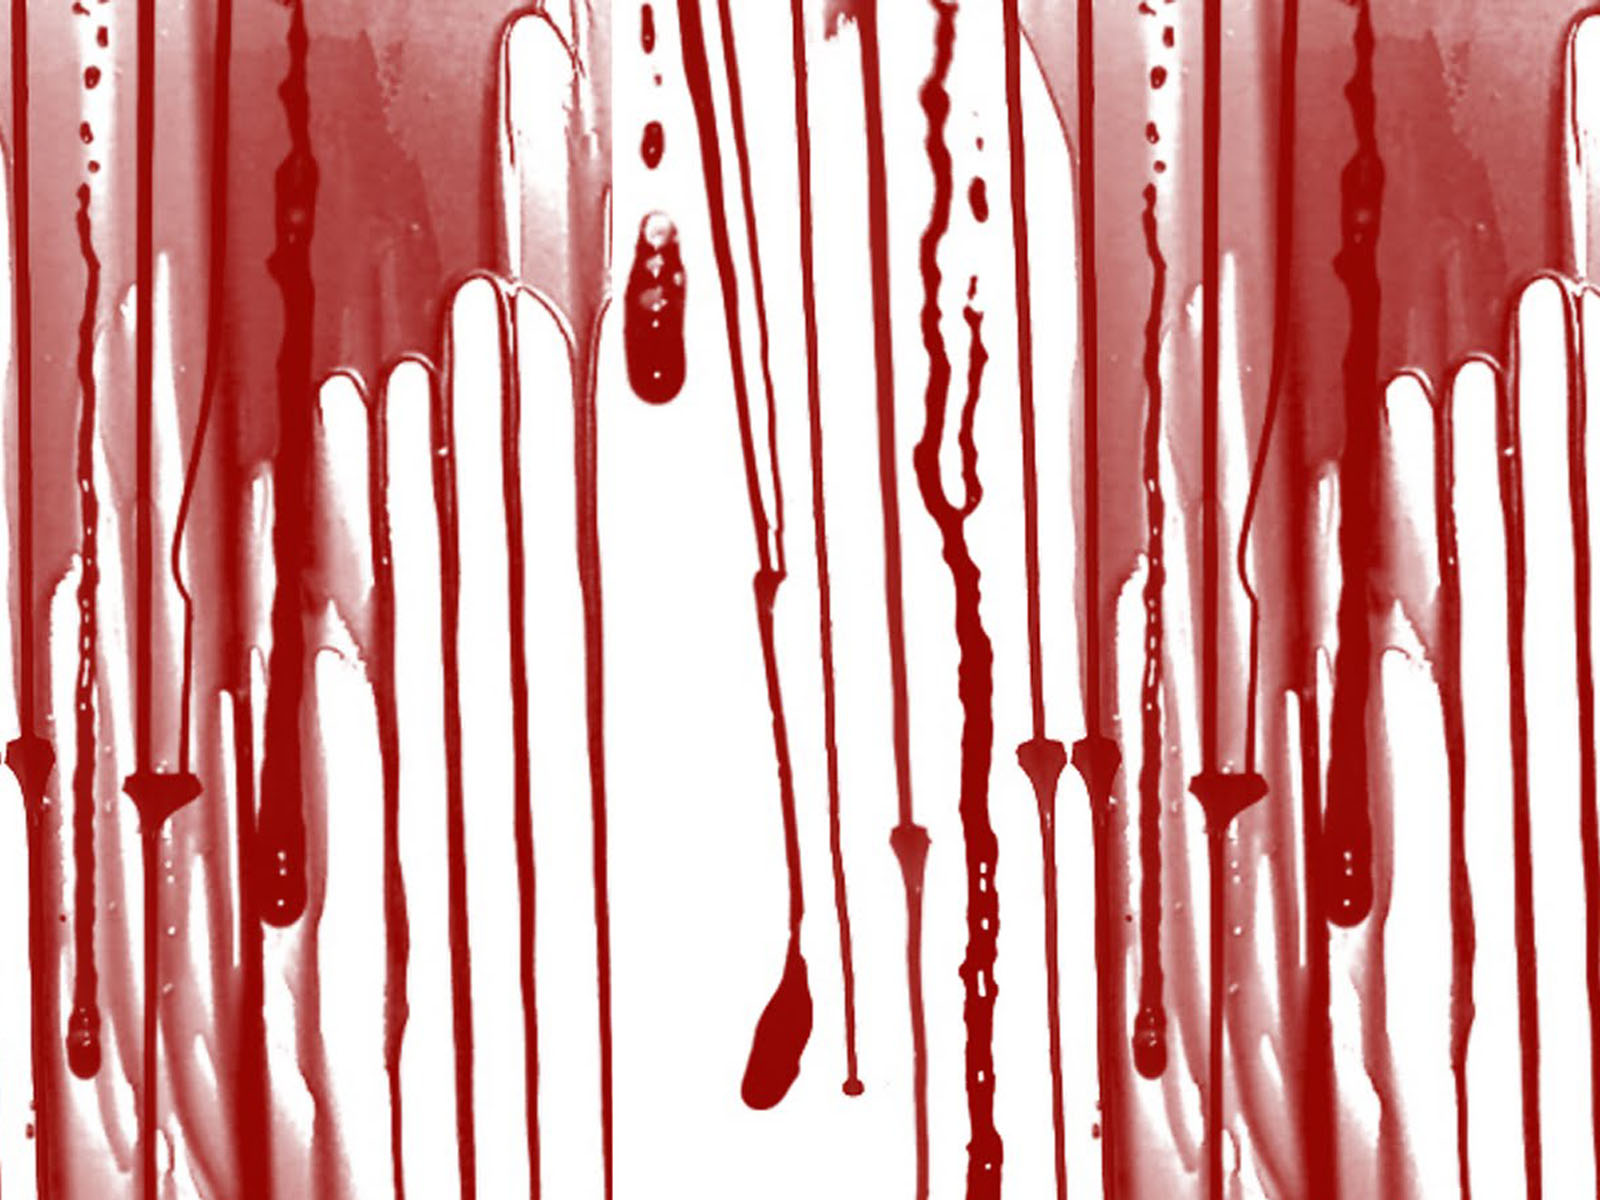 Blood+ Wallpapers